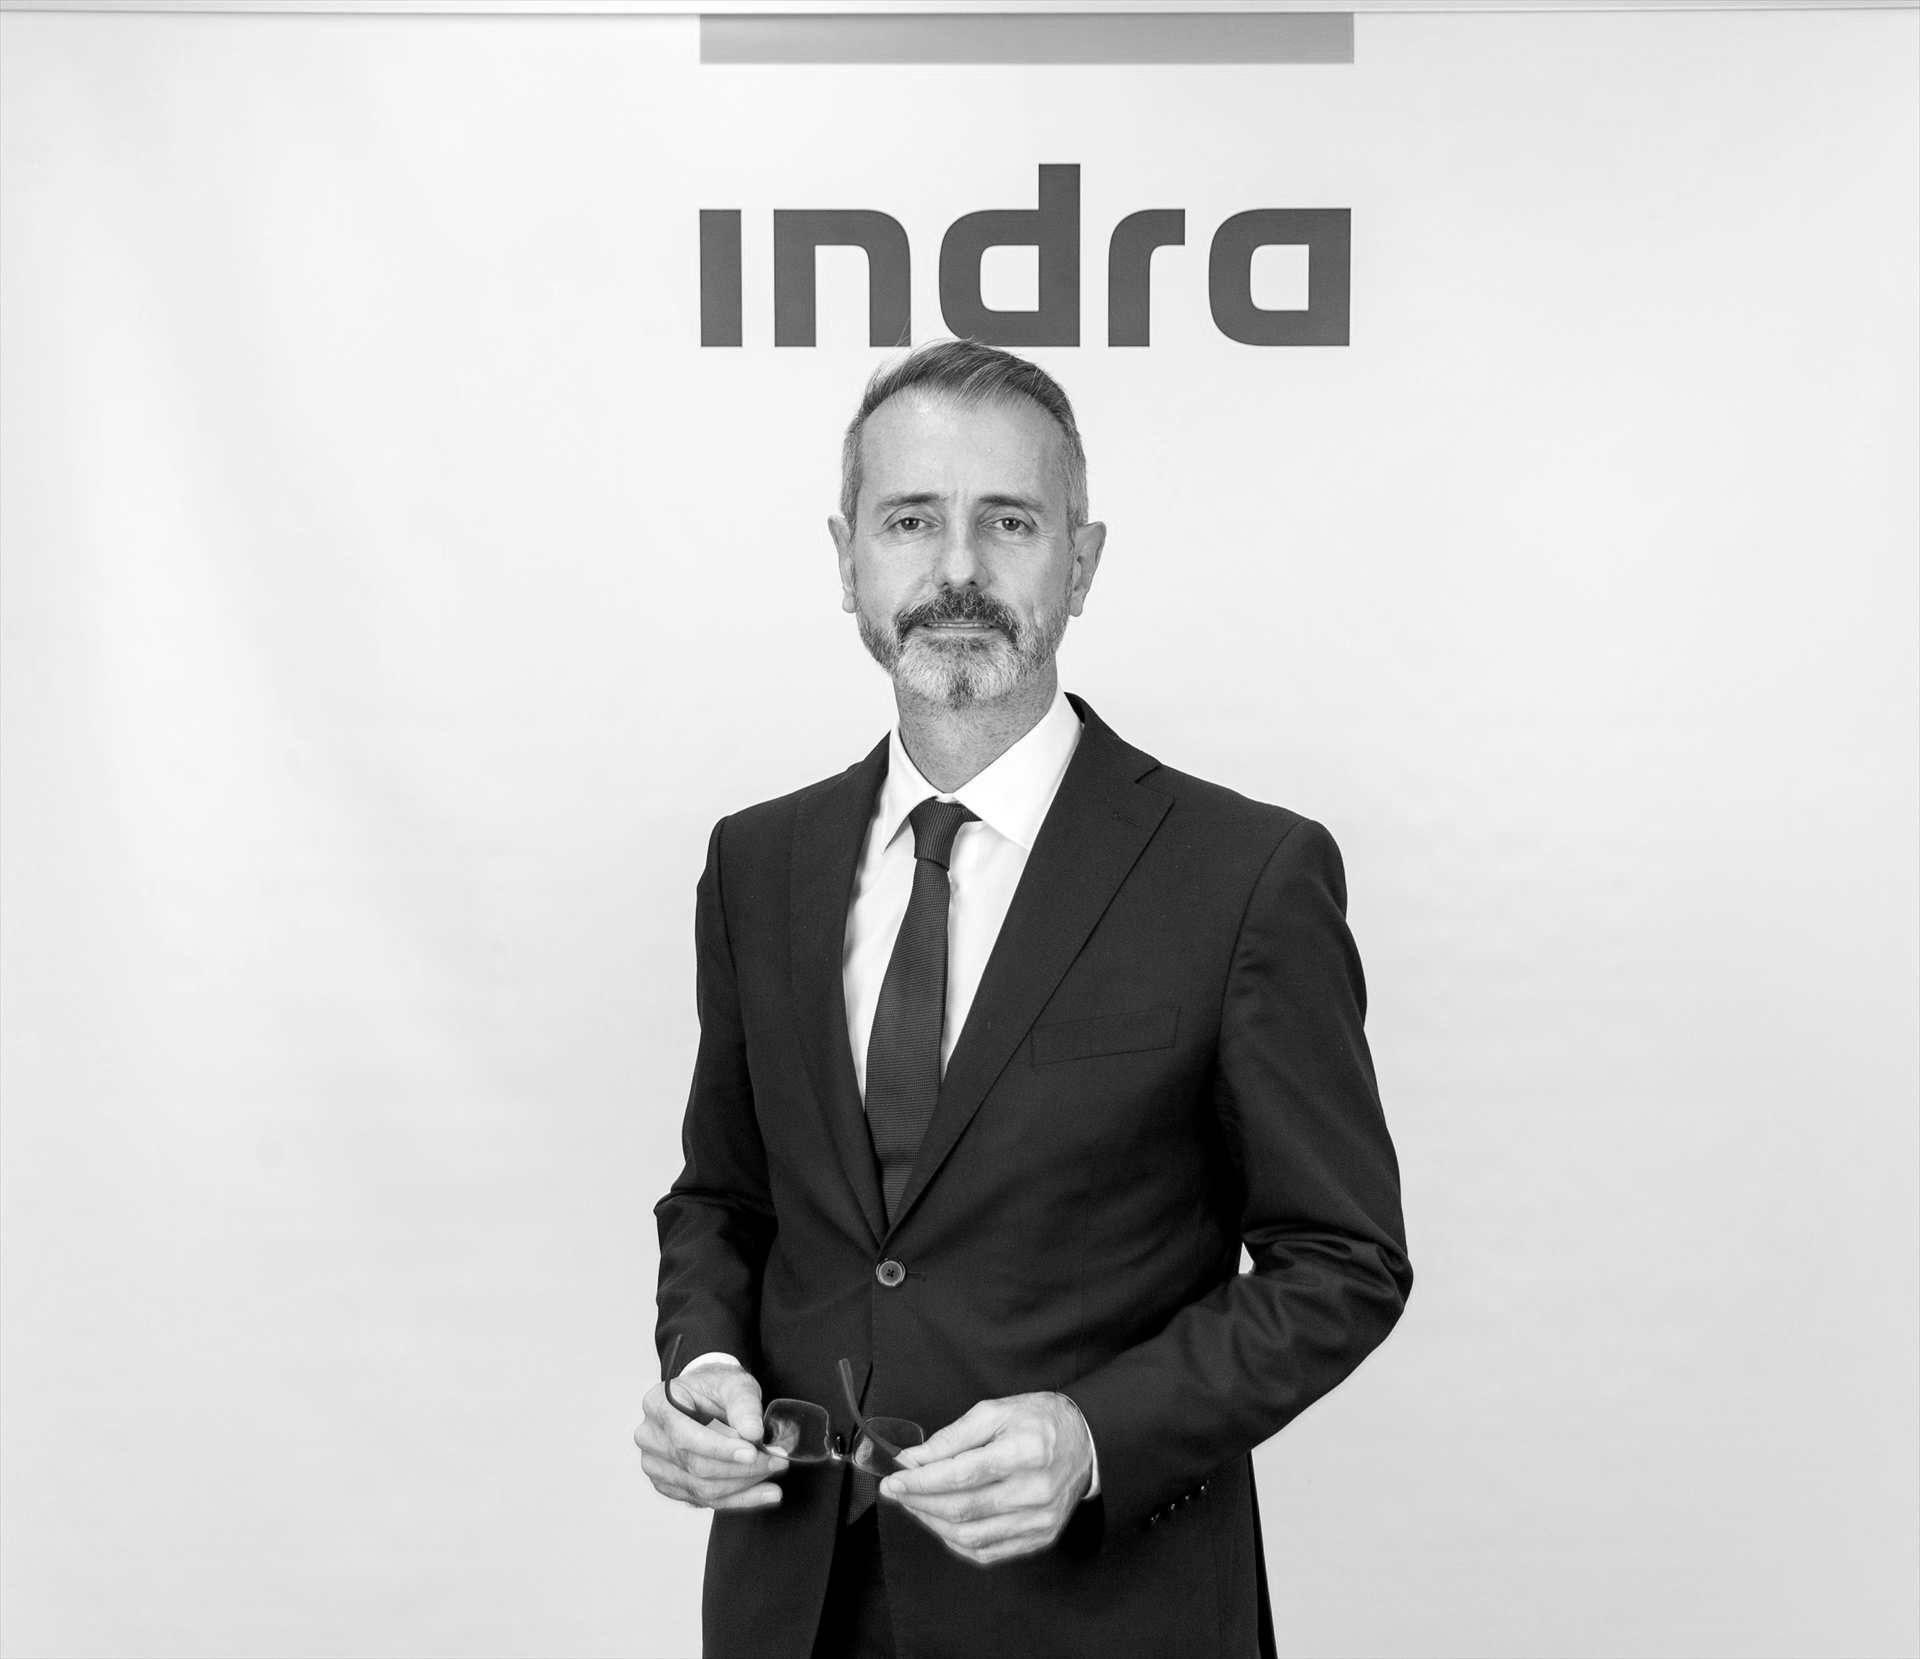 marc indra